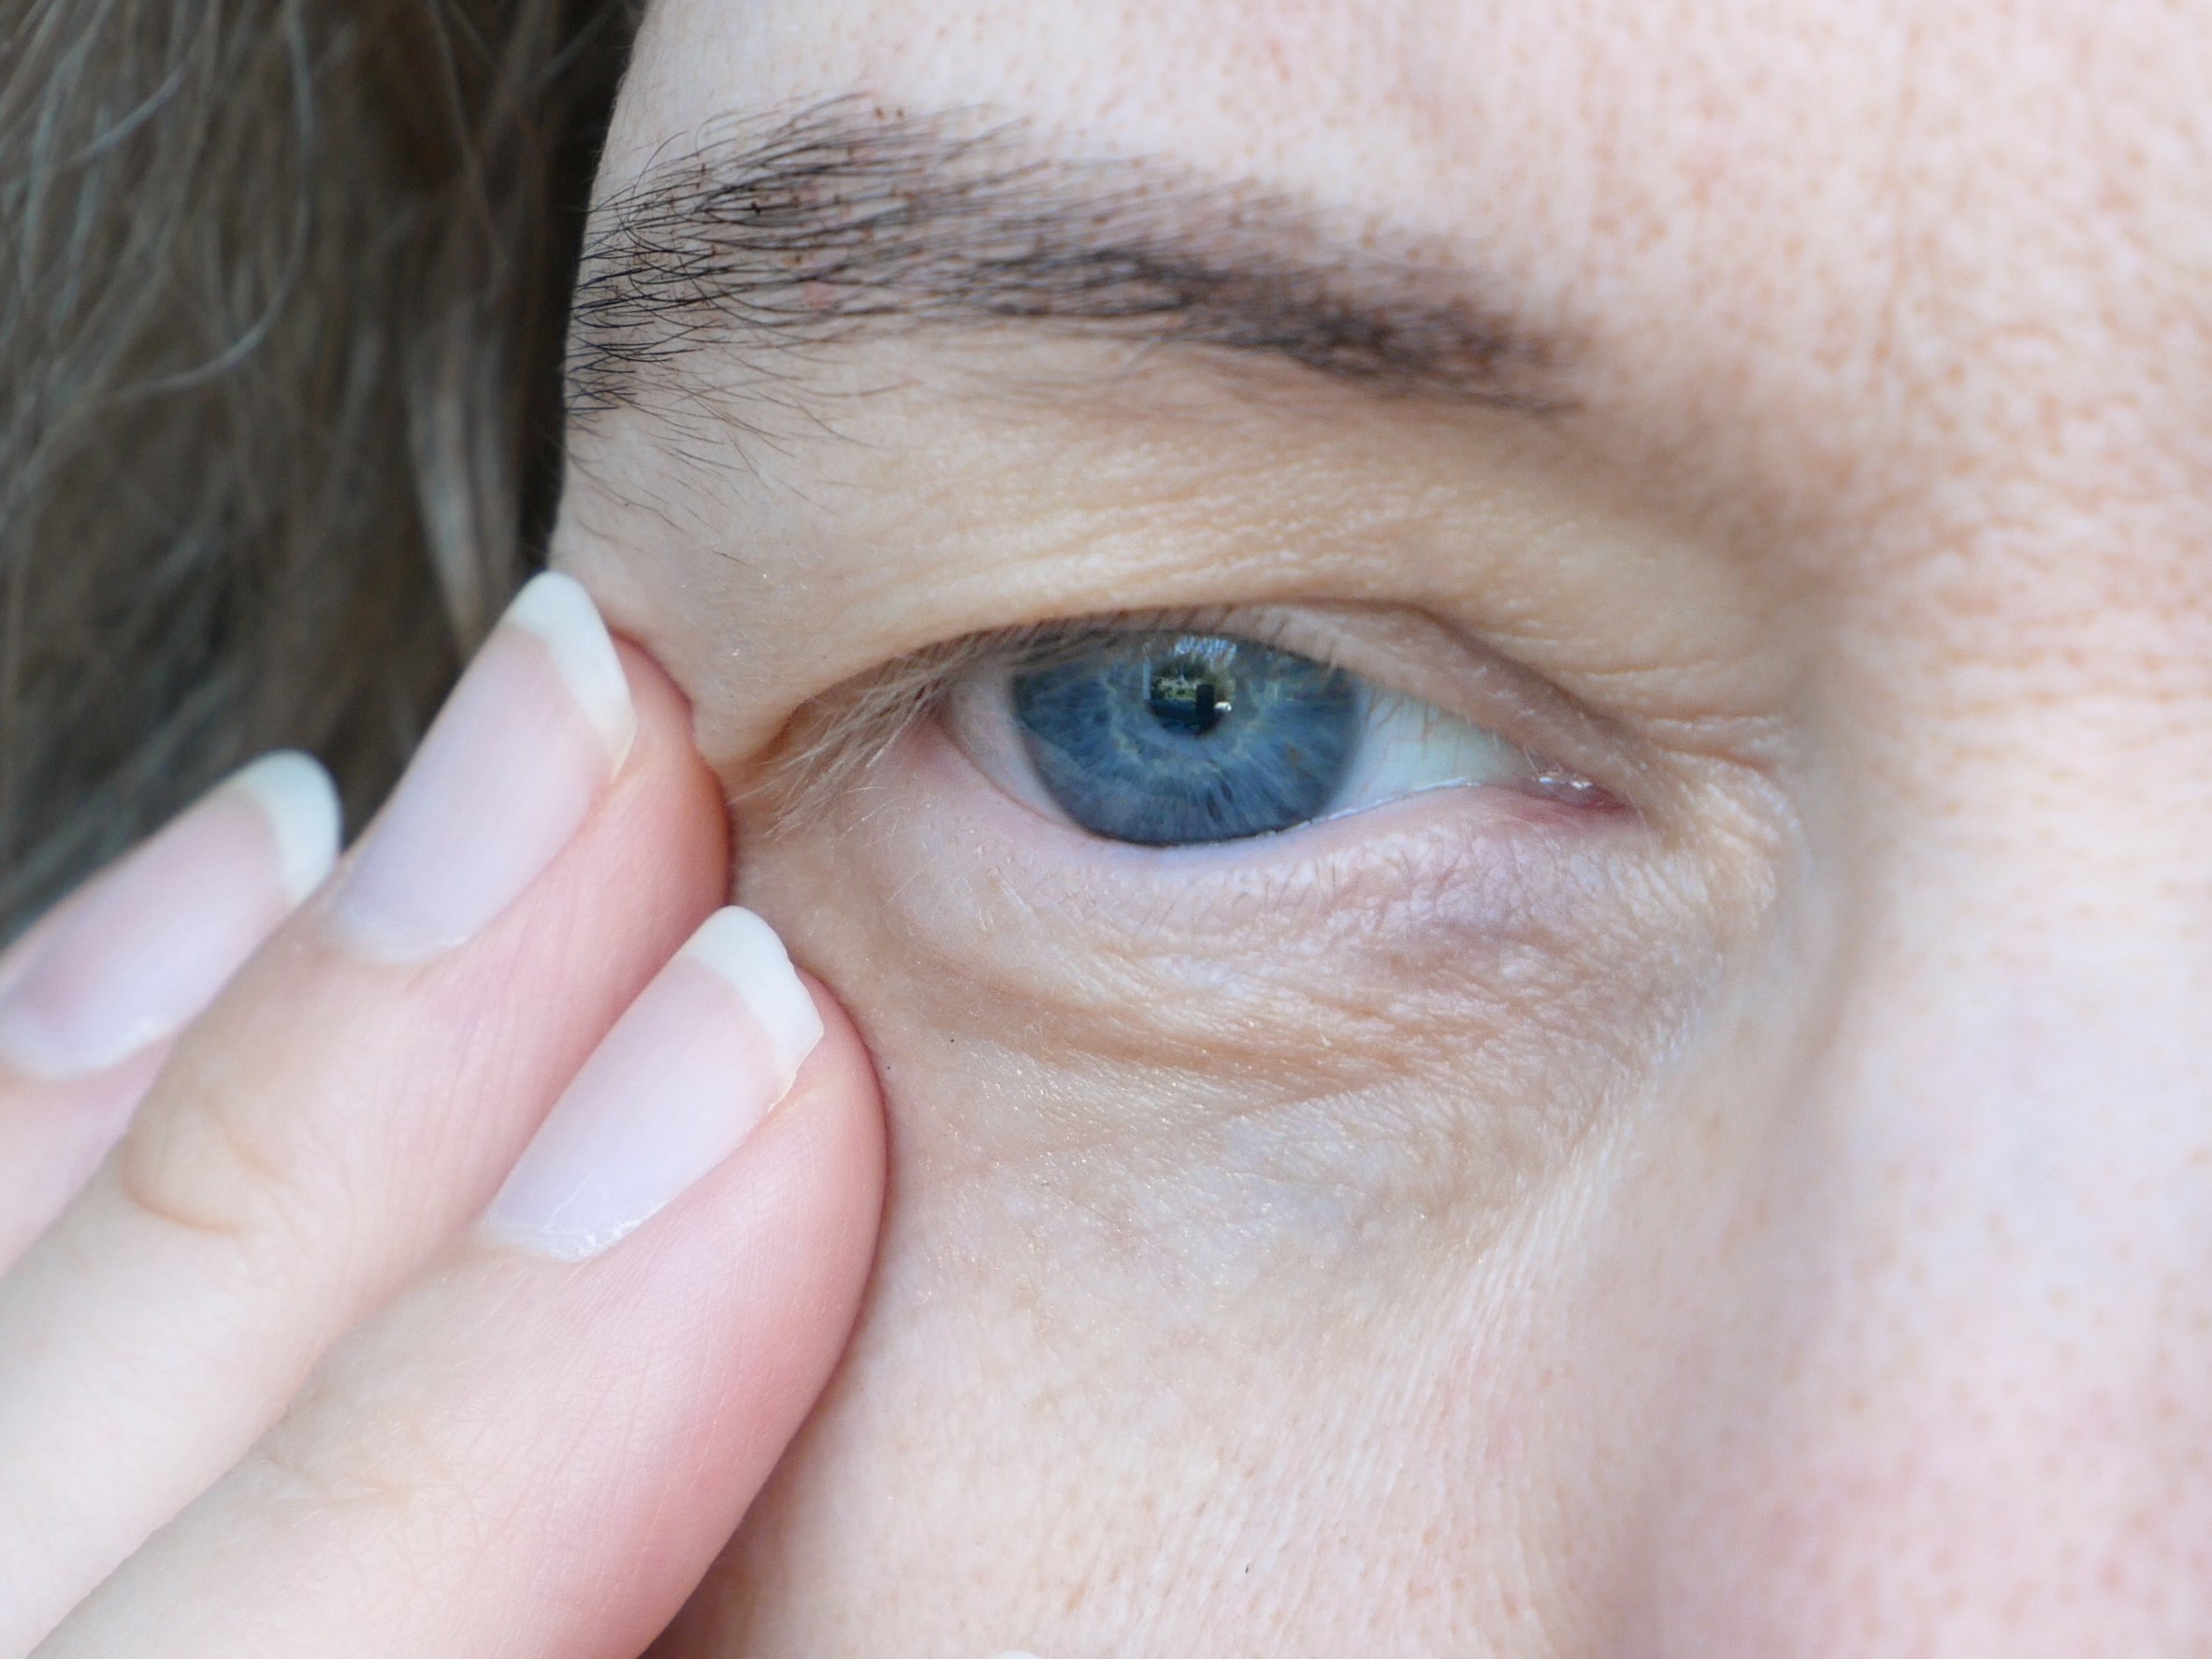 What Impact Can Droopy Eyelids Have on Vision?